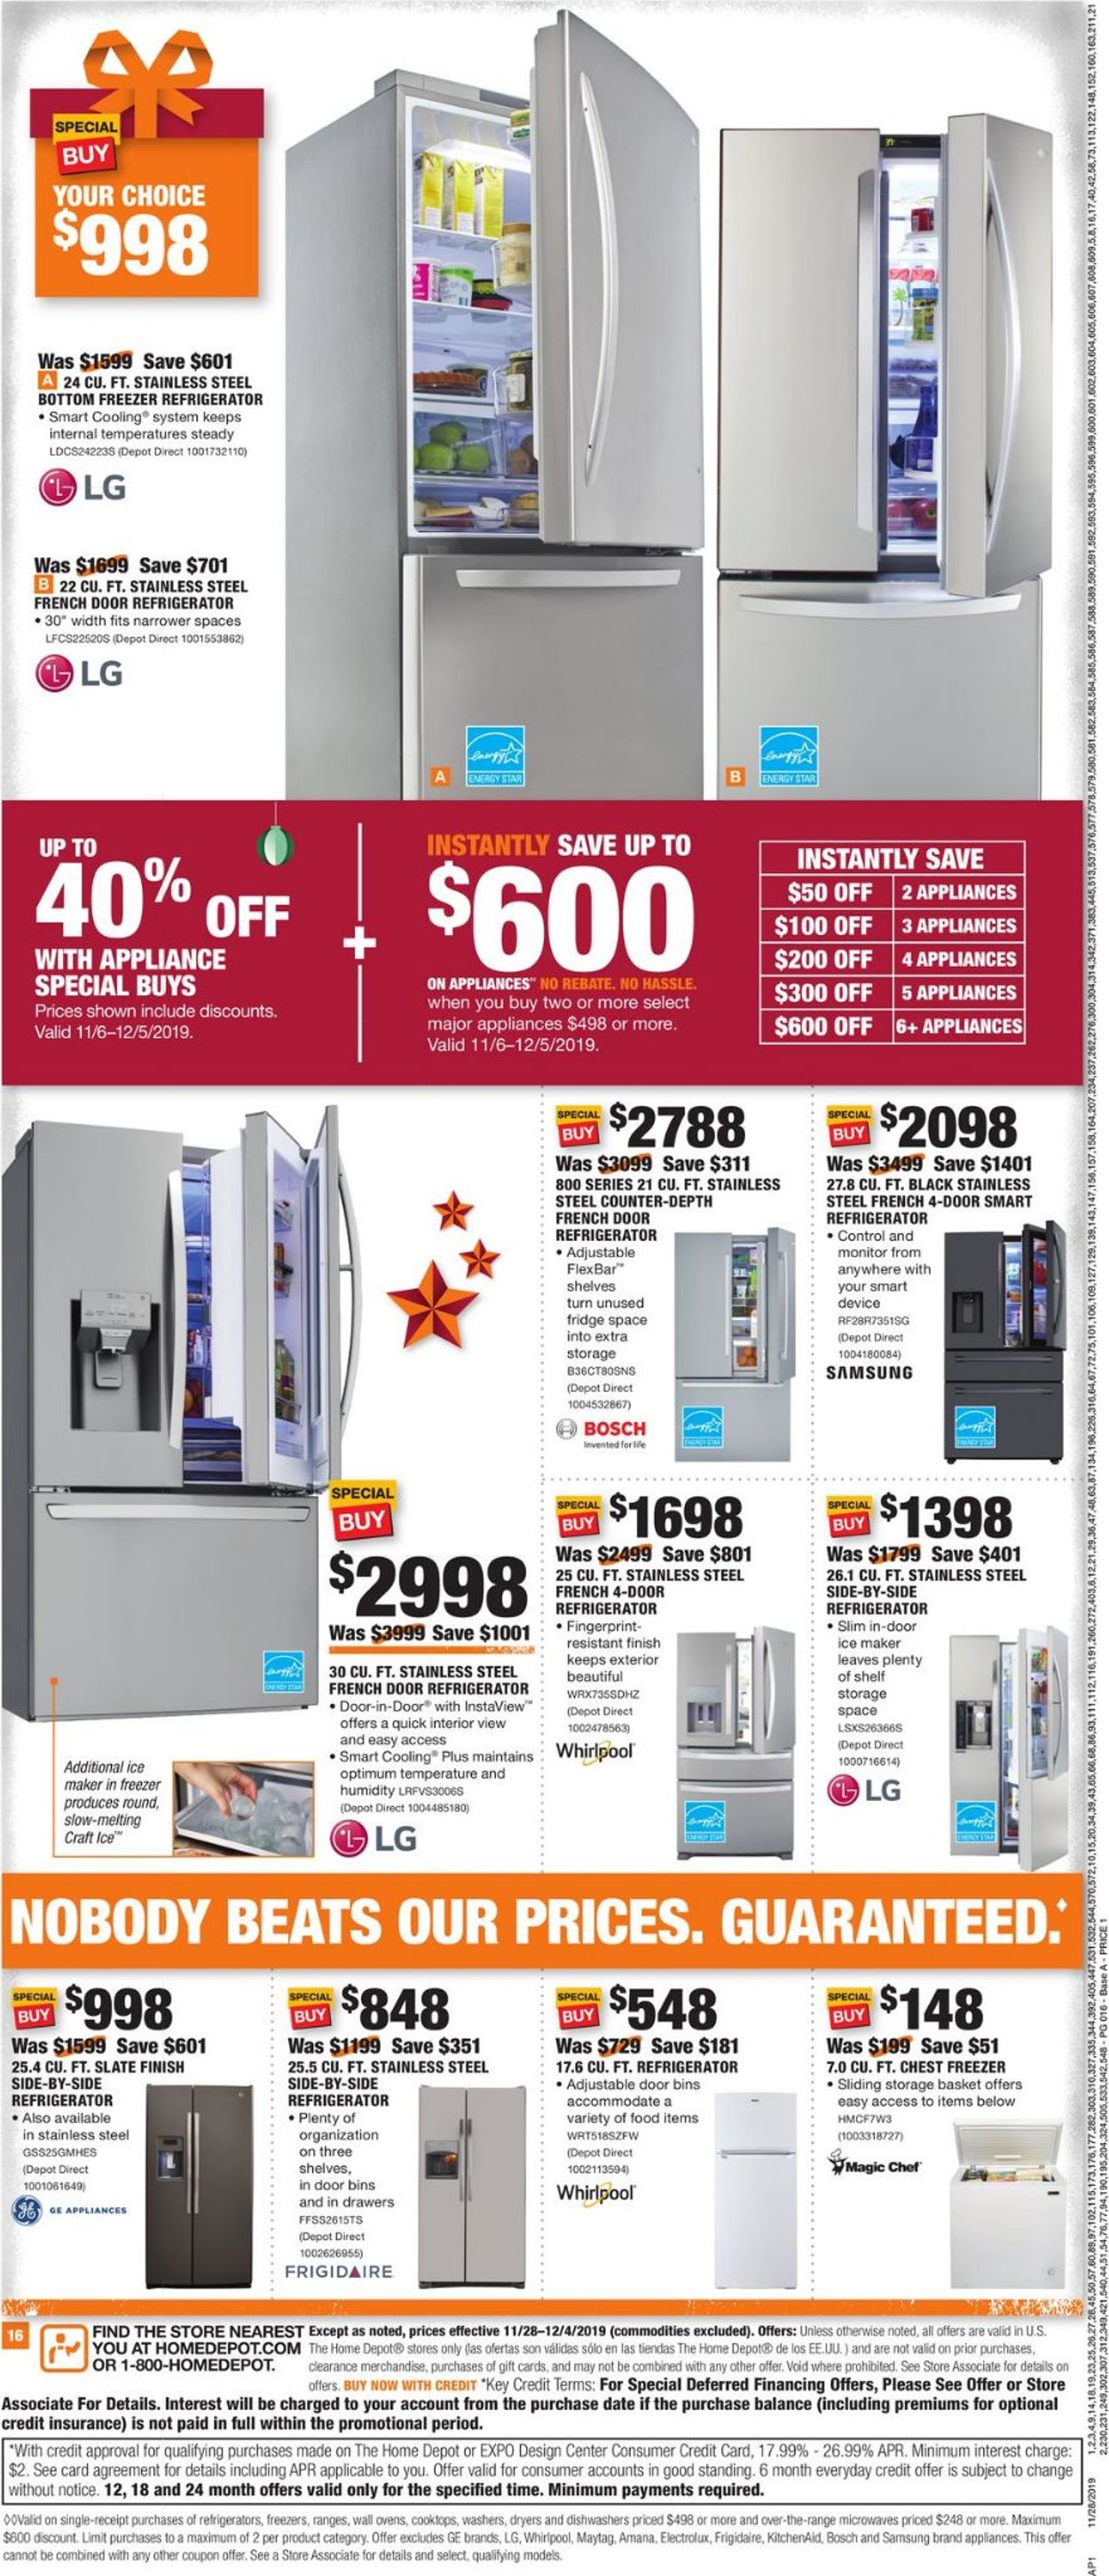 Home Depot - Black Friday Savings 2019 Current weekly ad 11/28 - 12/04/2019 [16] - www.bagssaleusa.com